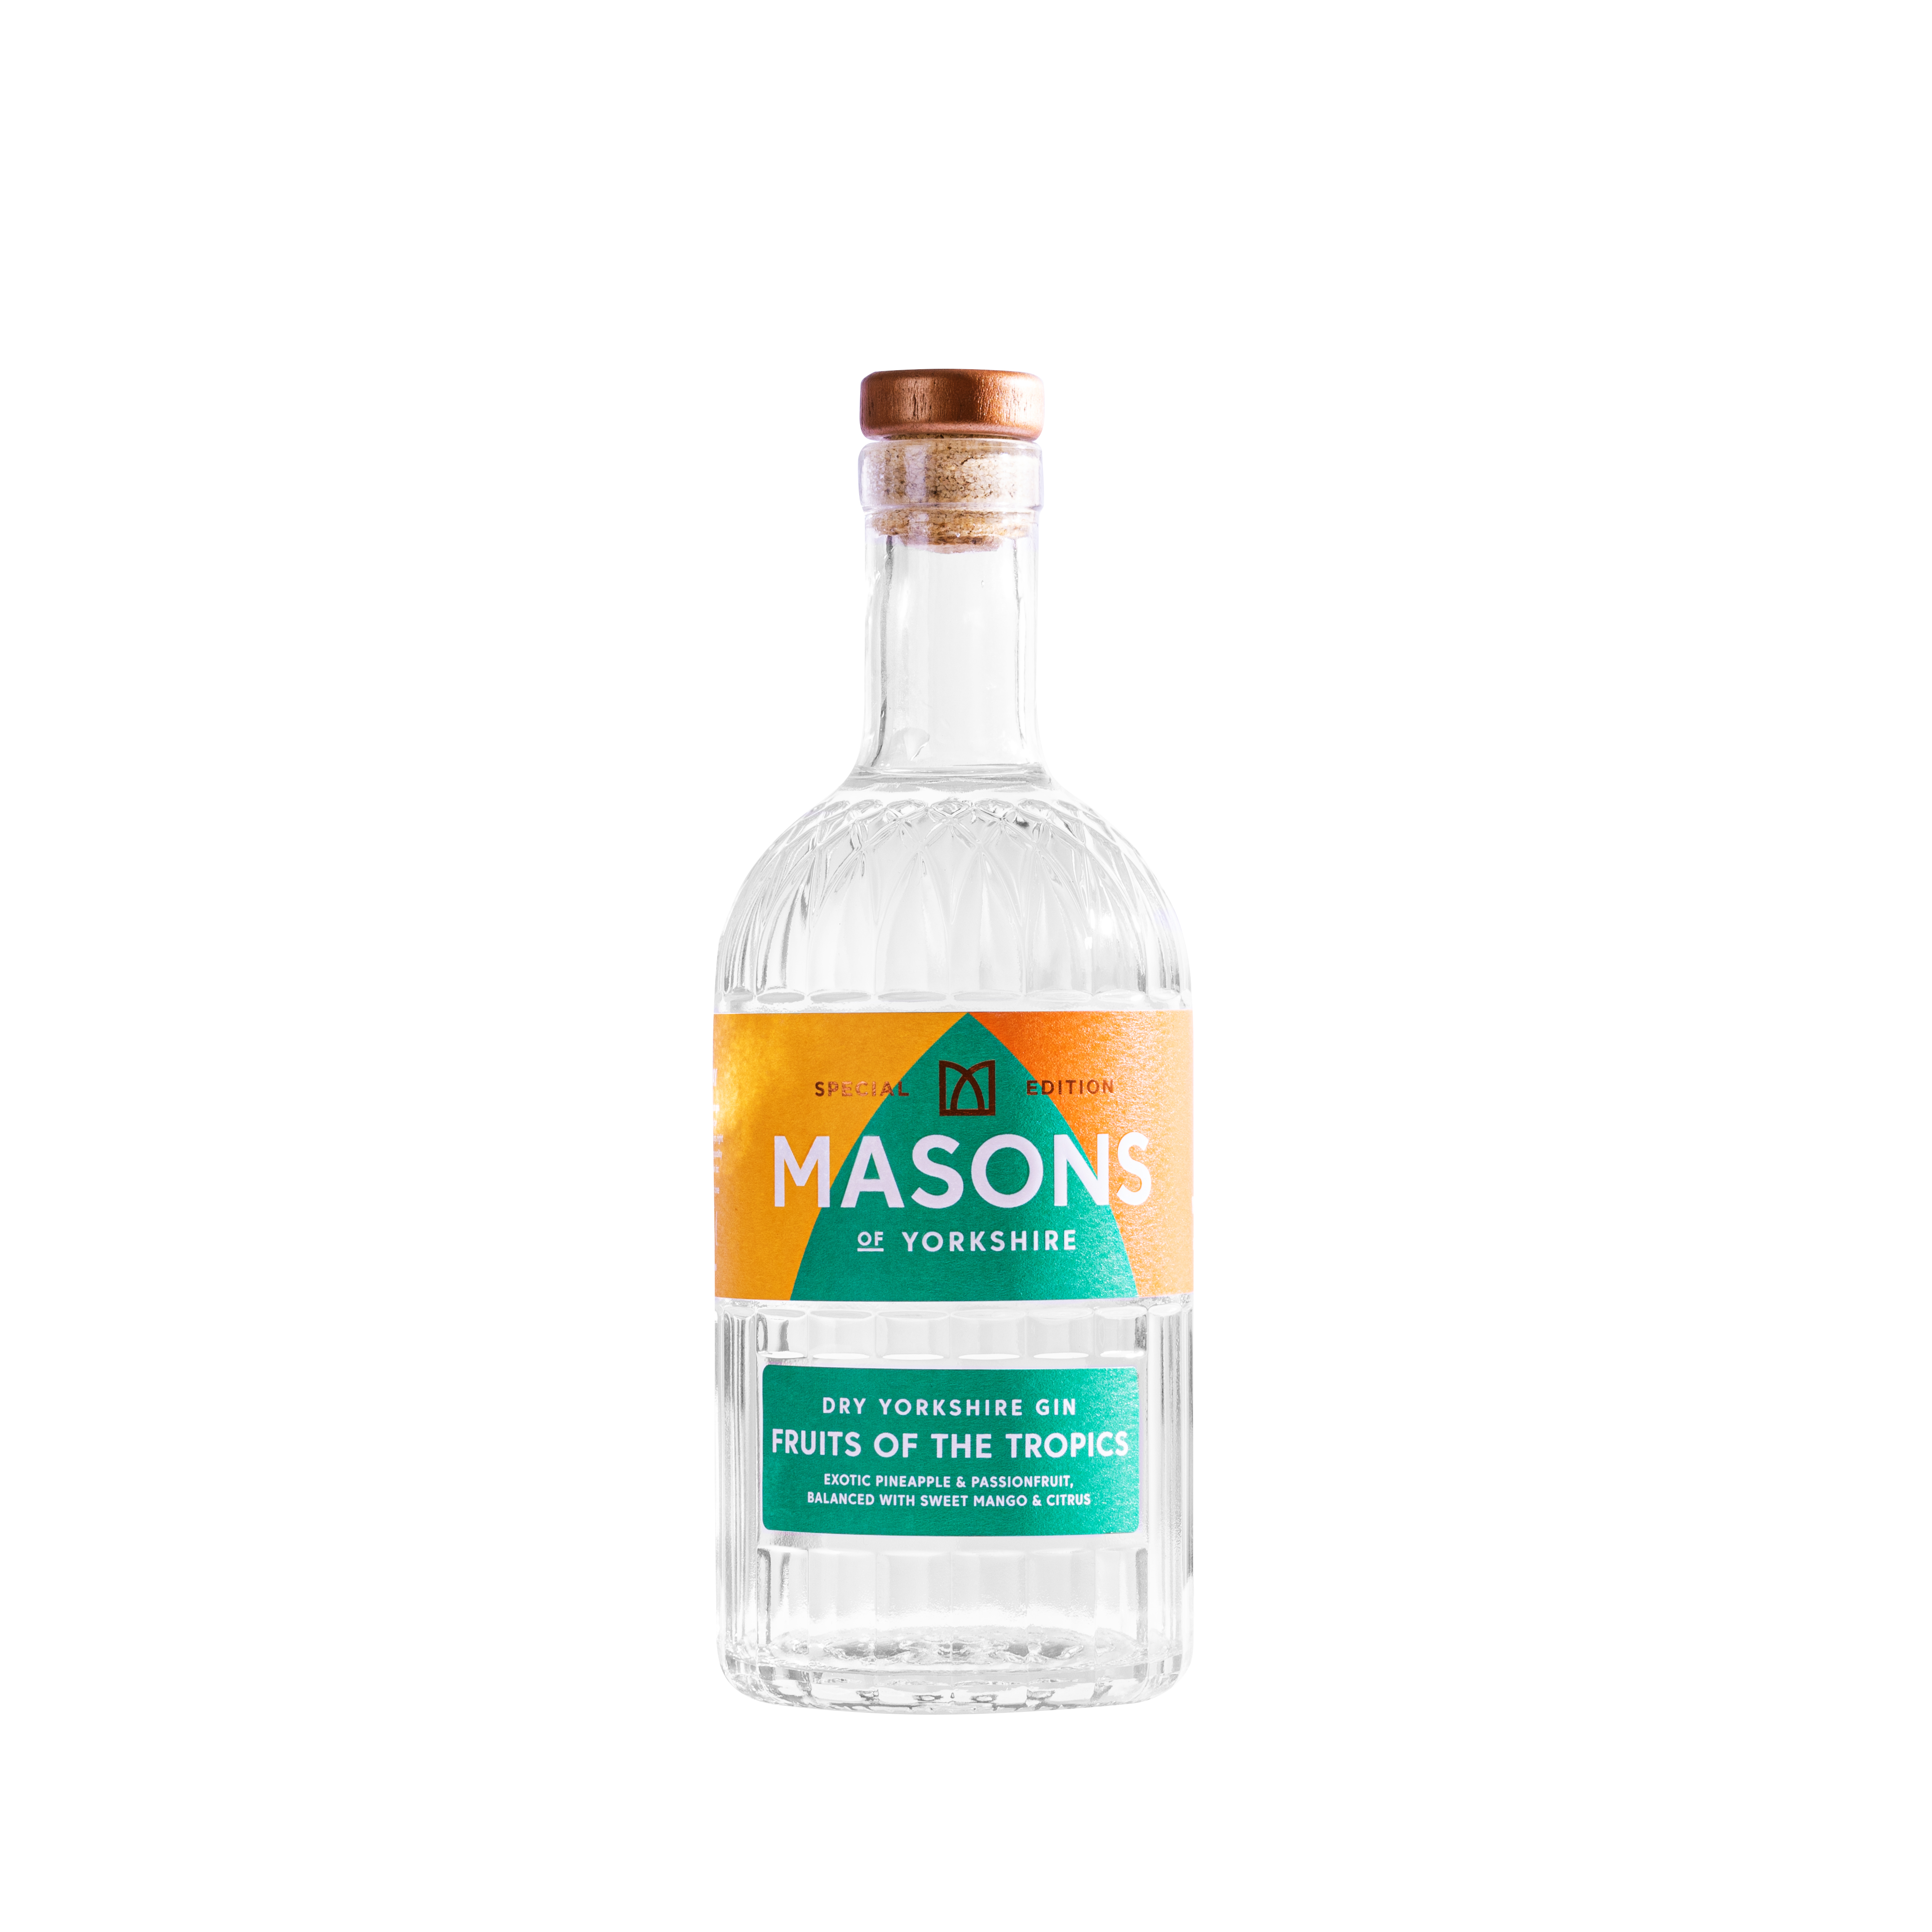 MASONS FRUIT OF THE TROPIC 38% 70CL